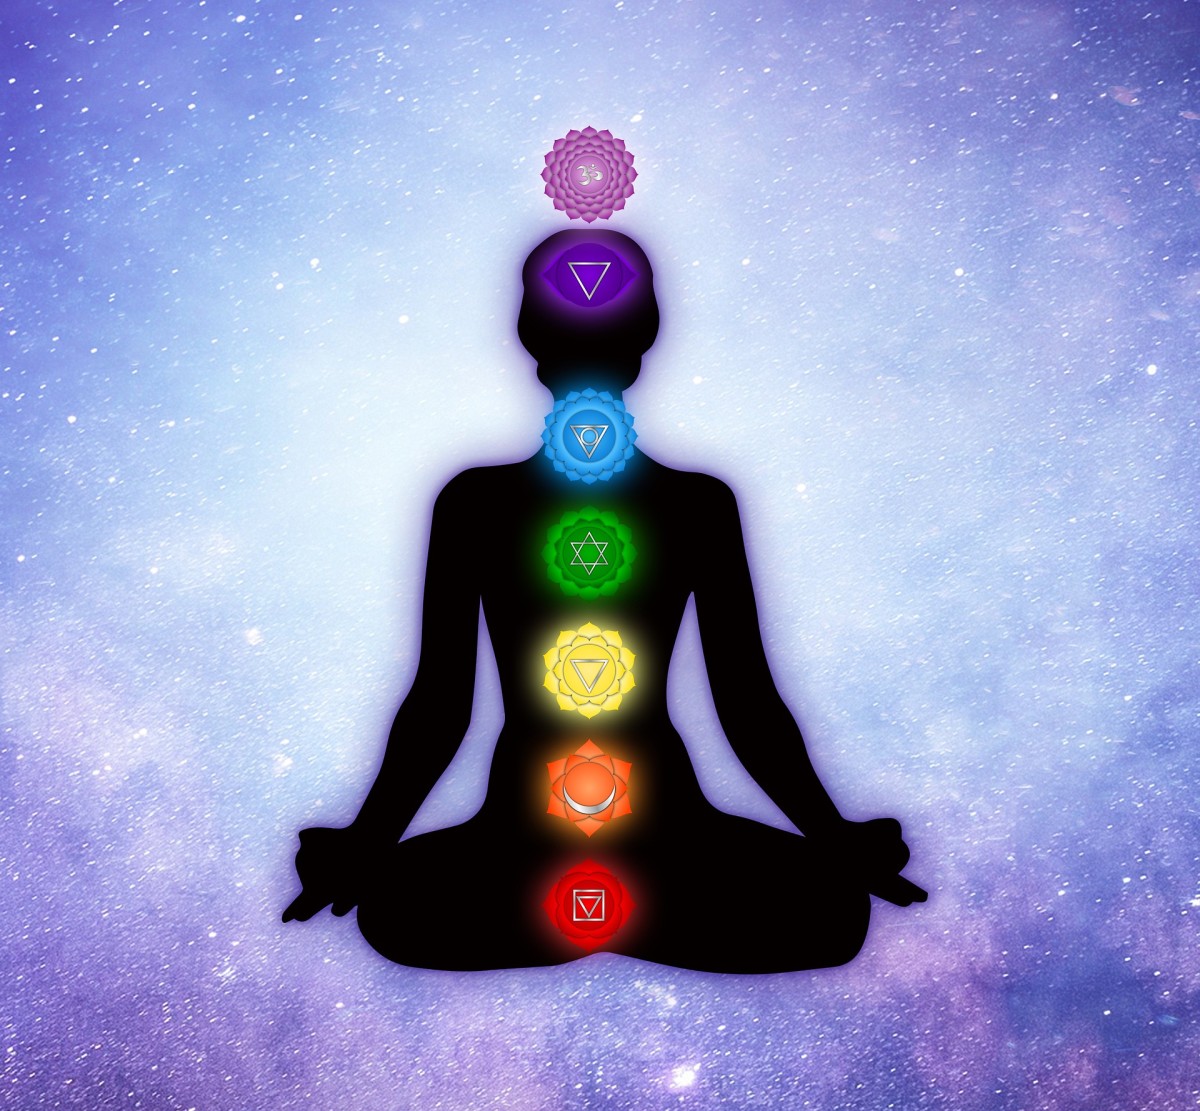 The seven main chakras are energy centers located in your subtle body from the base of your spine to the crown of your head.